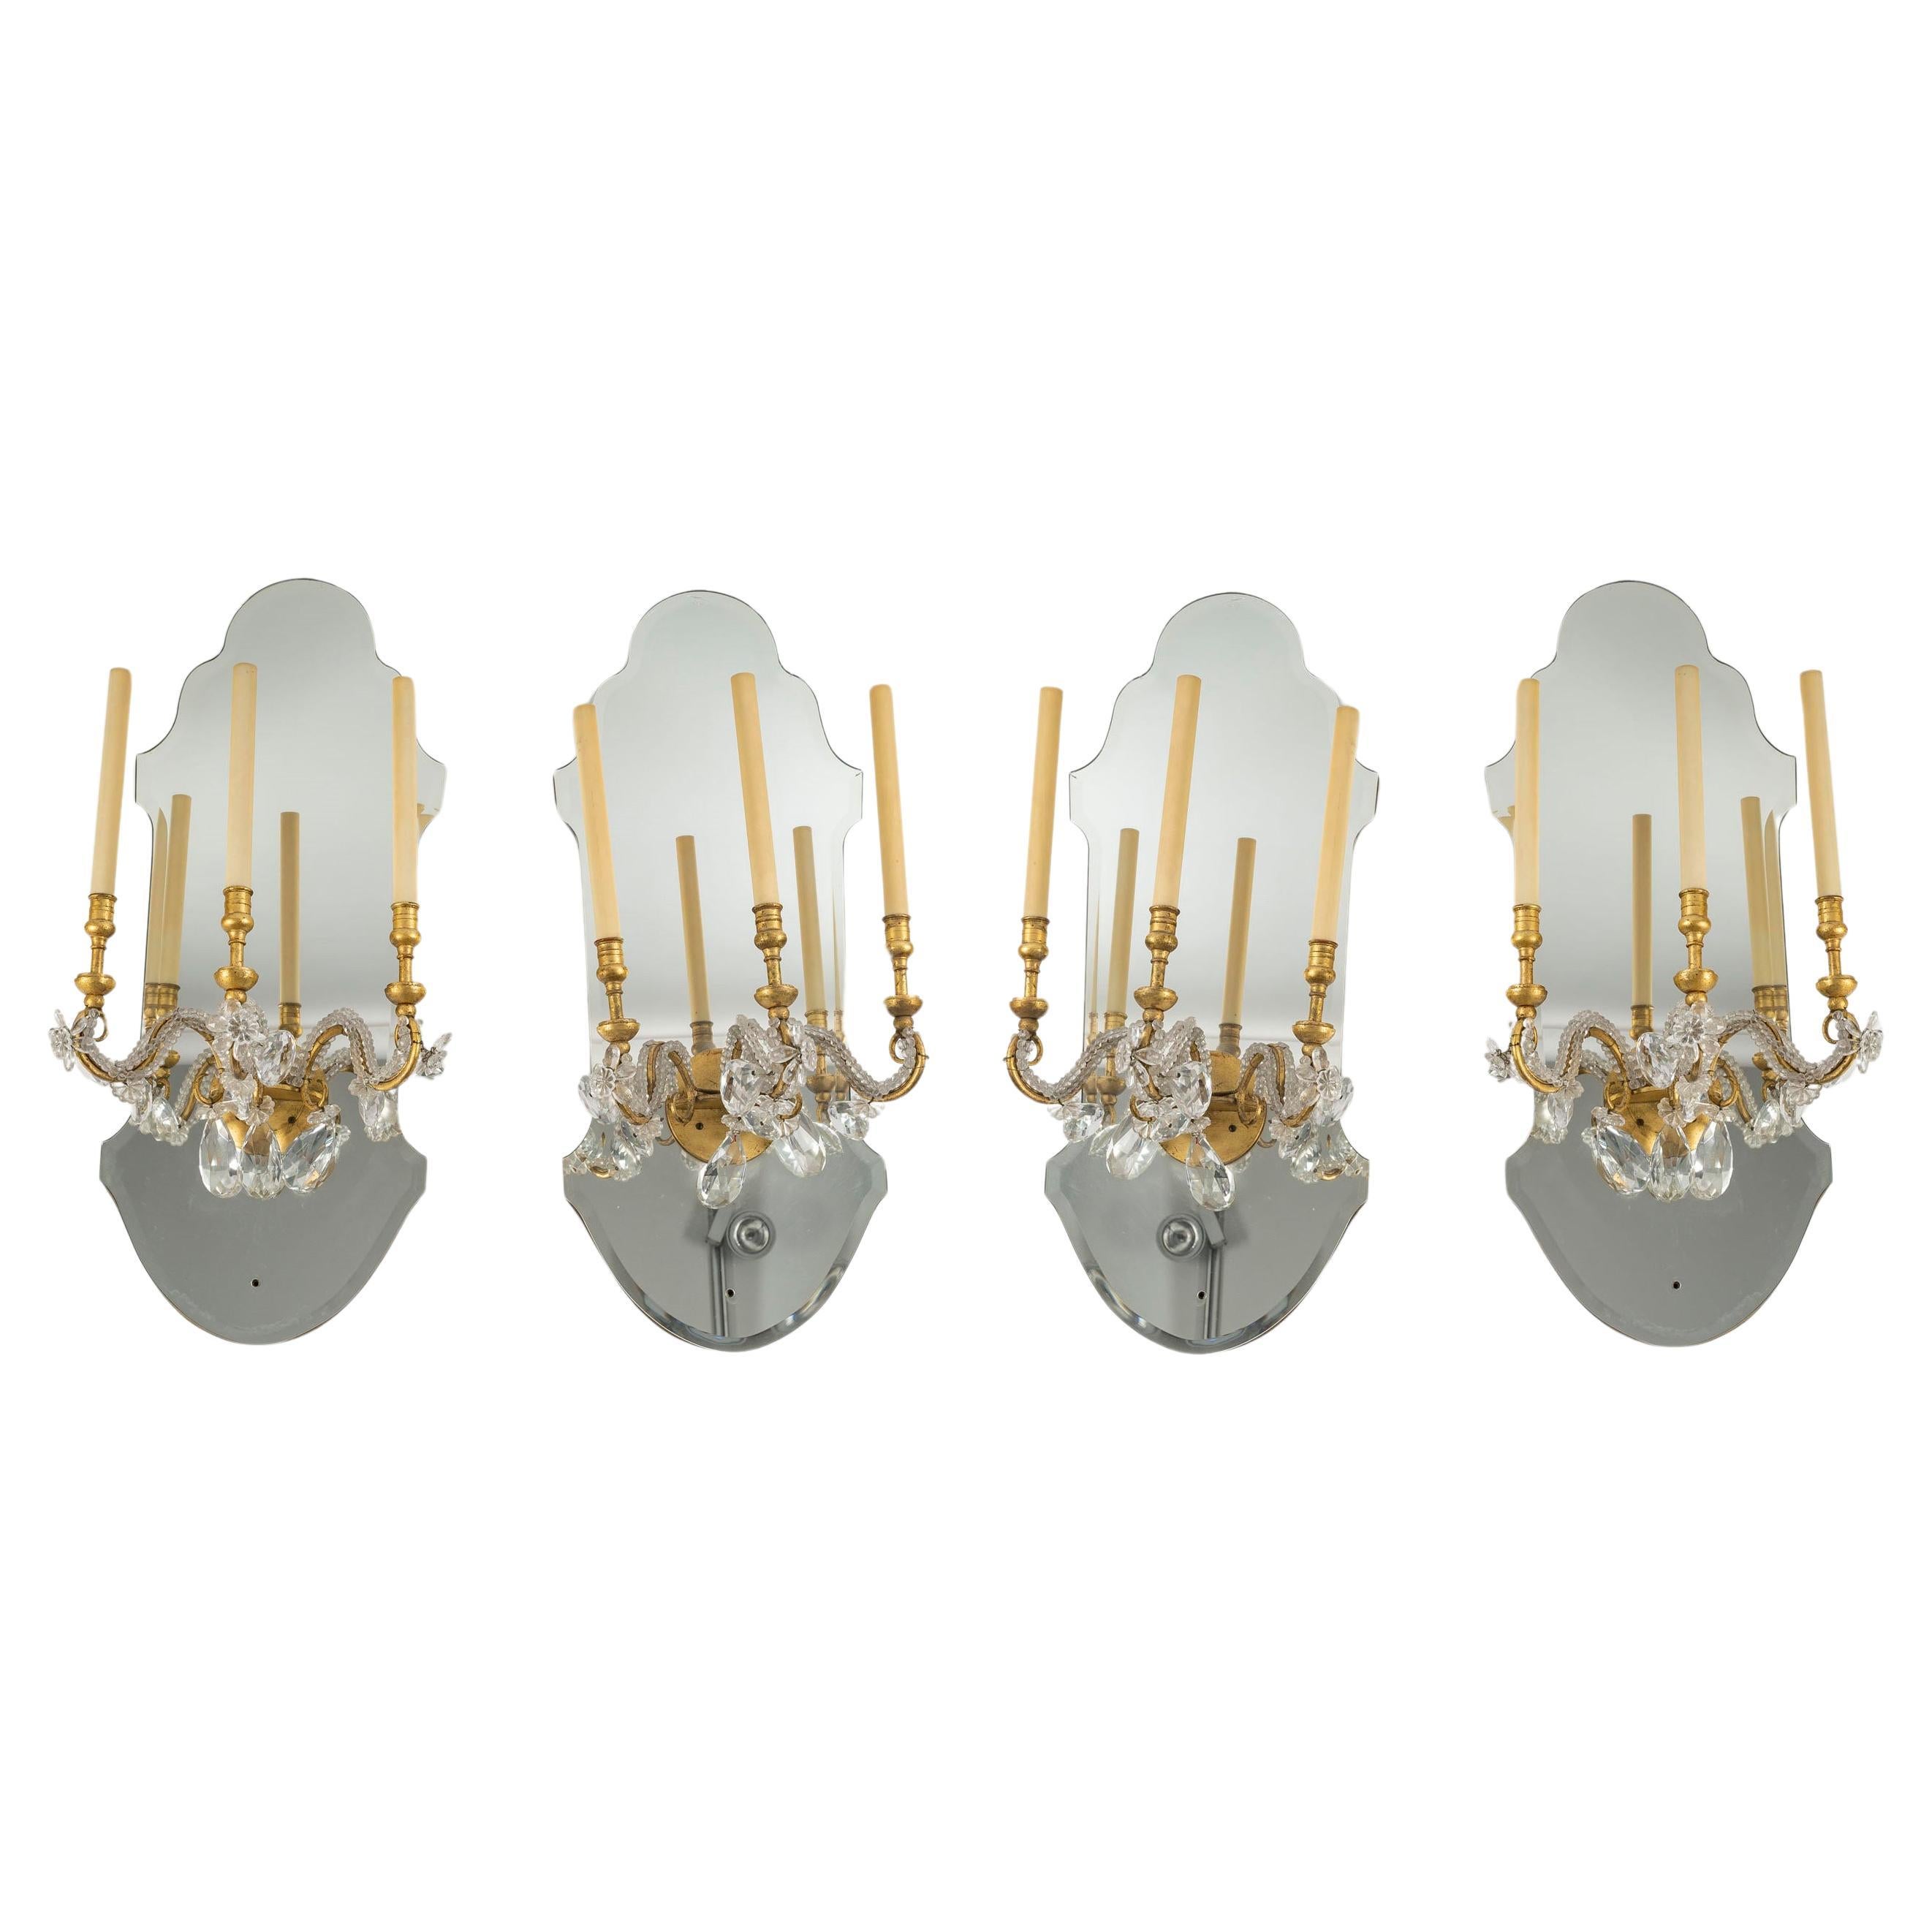 Suite of 4 Gilded Iron and Mirror Sconces with Glass Drops, 1950-1960.